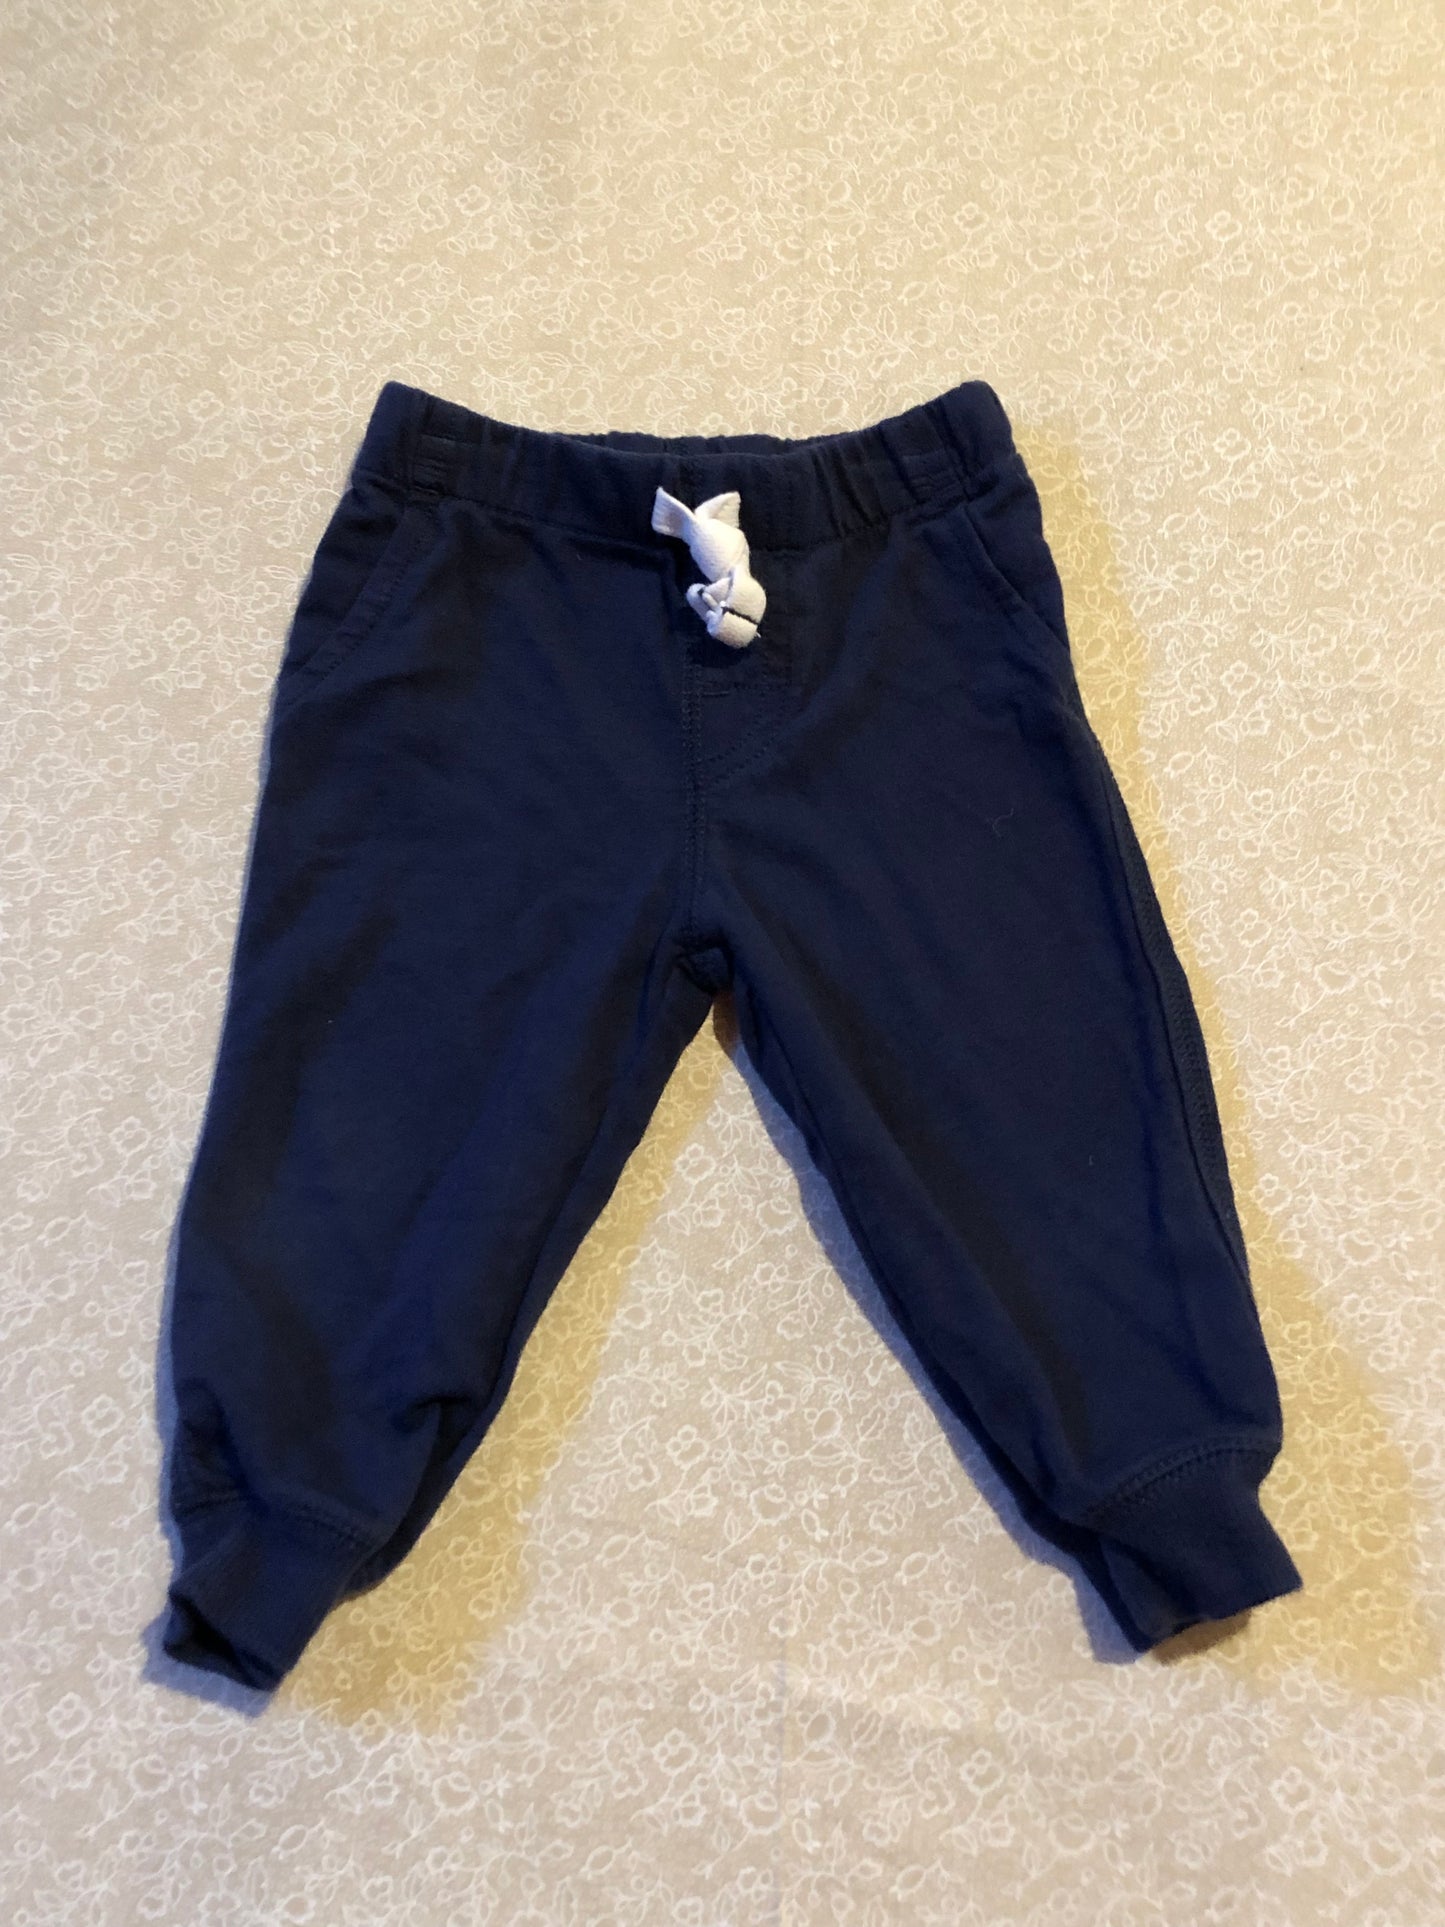 12-months-pants-carters-dark-blue-white-draw-string-pockets